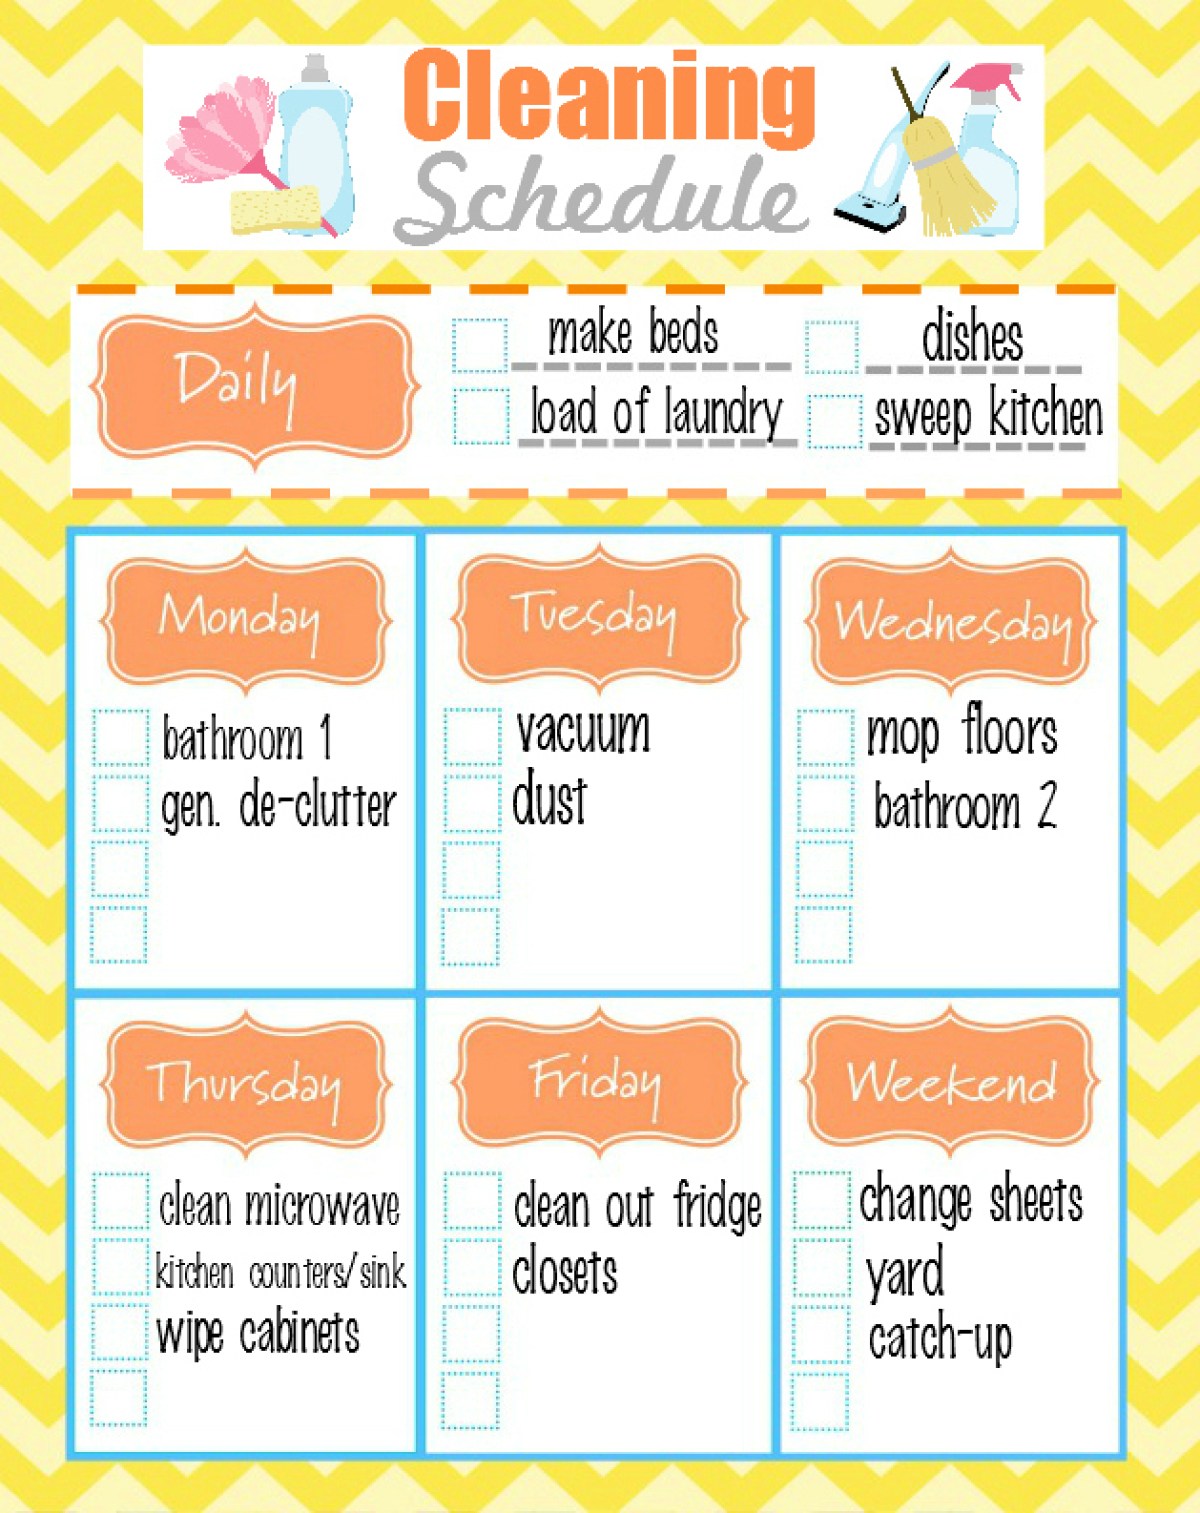 Get Sample Cleaning Schedule For Home Pictures sample shop design